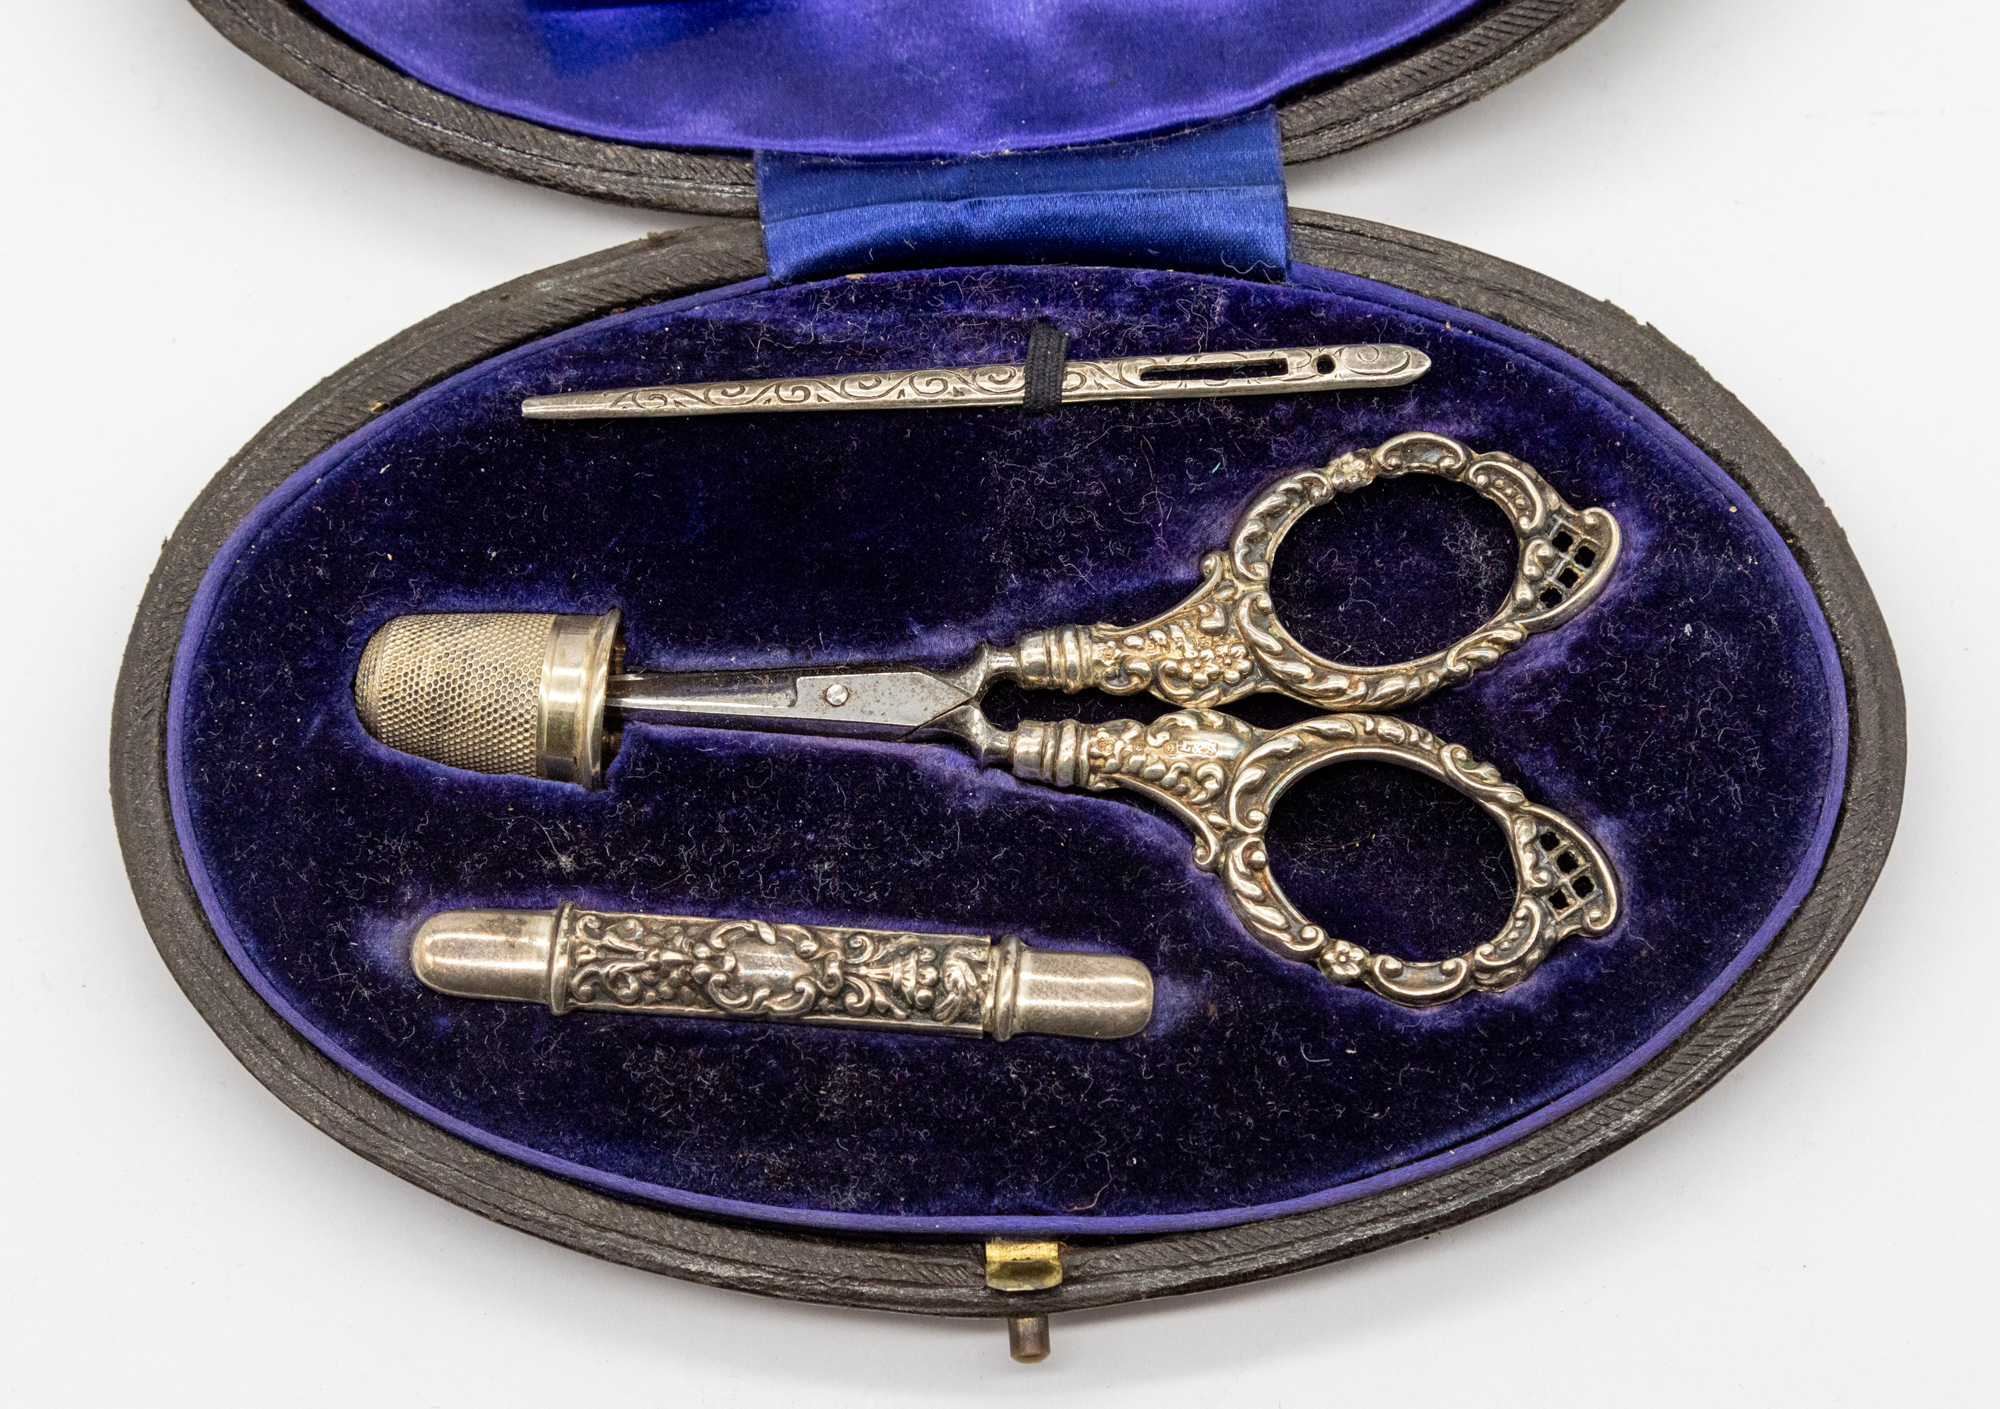 A cased late Victorian silver sewing set consisting of threading needle, scissors, thimble and - Image 2 of 2